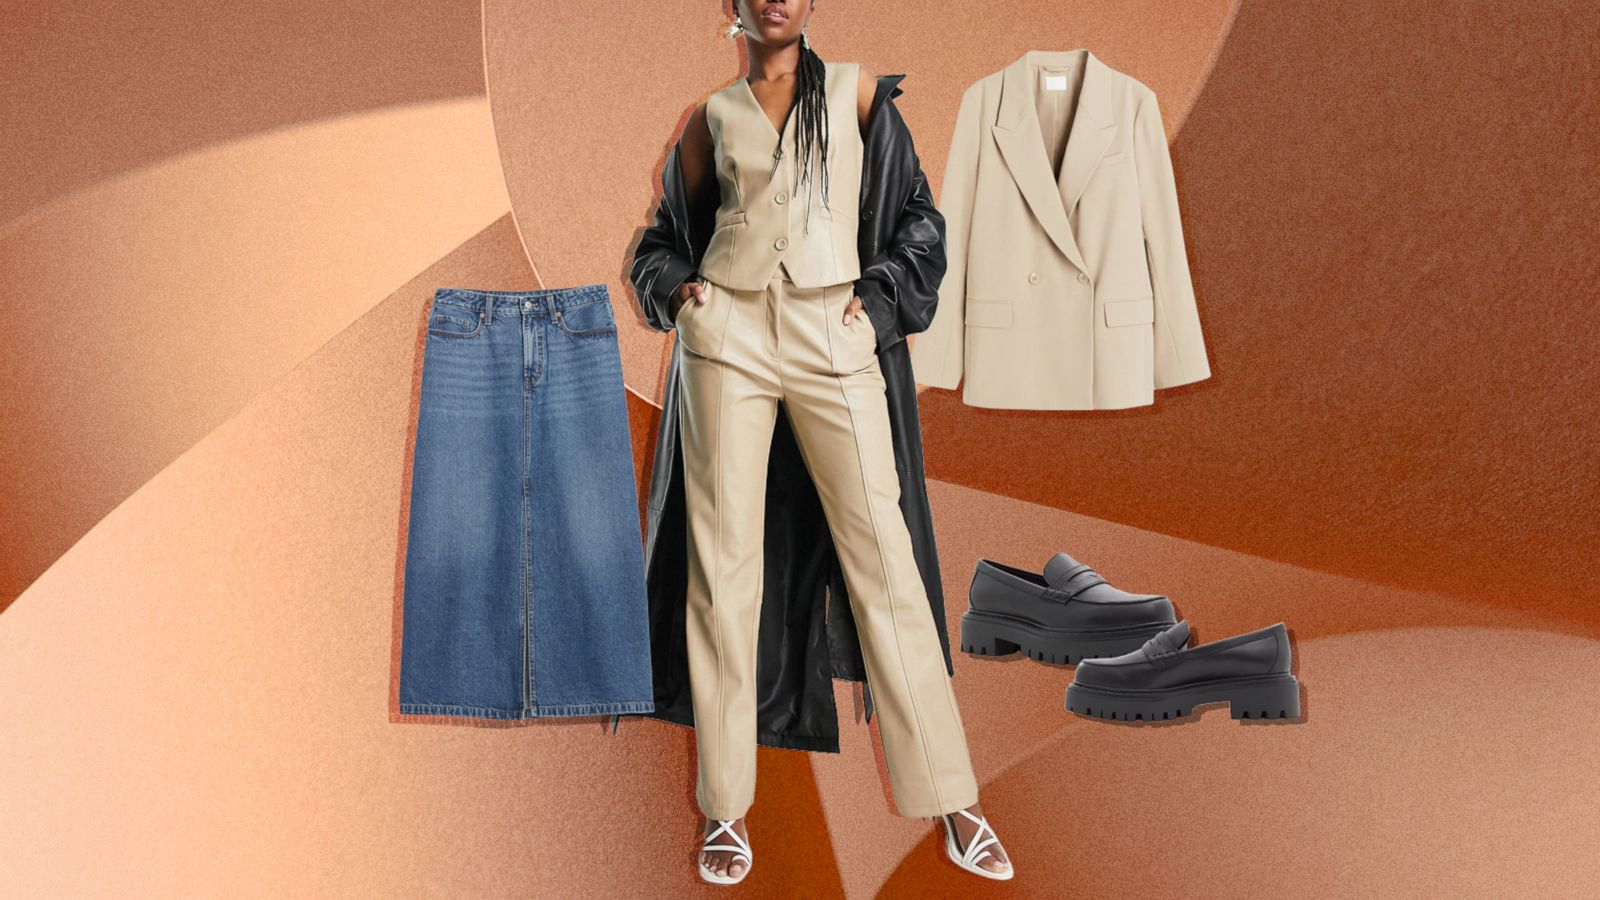 Why Capsule Closet Is 2021's Biggest Fashion Trend